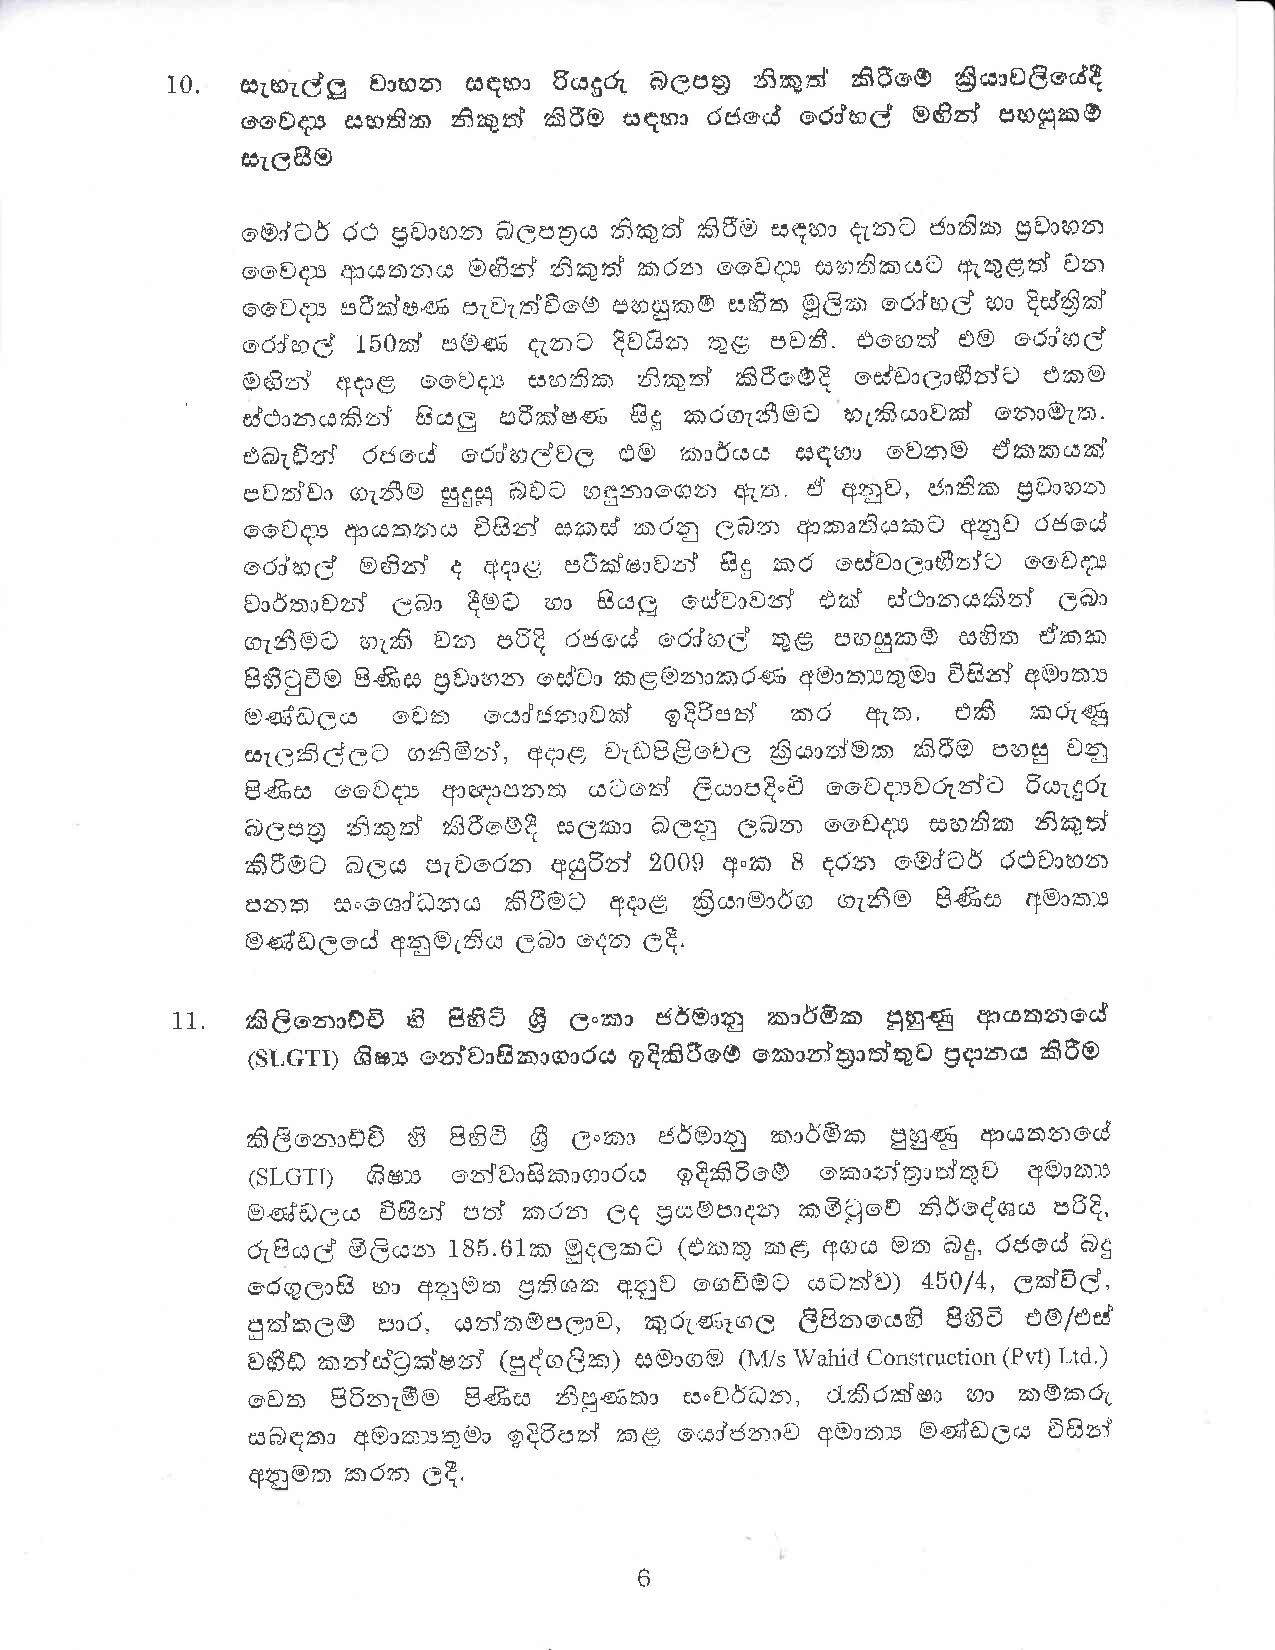 Cabinet Decision on 05.02.2020 page 006